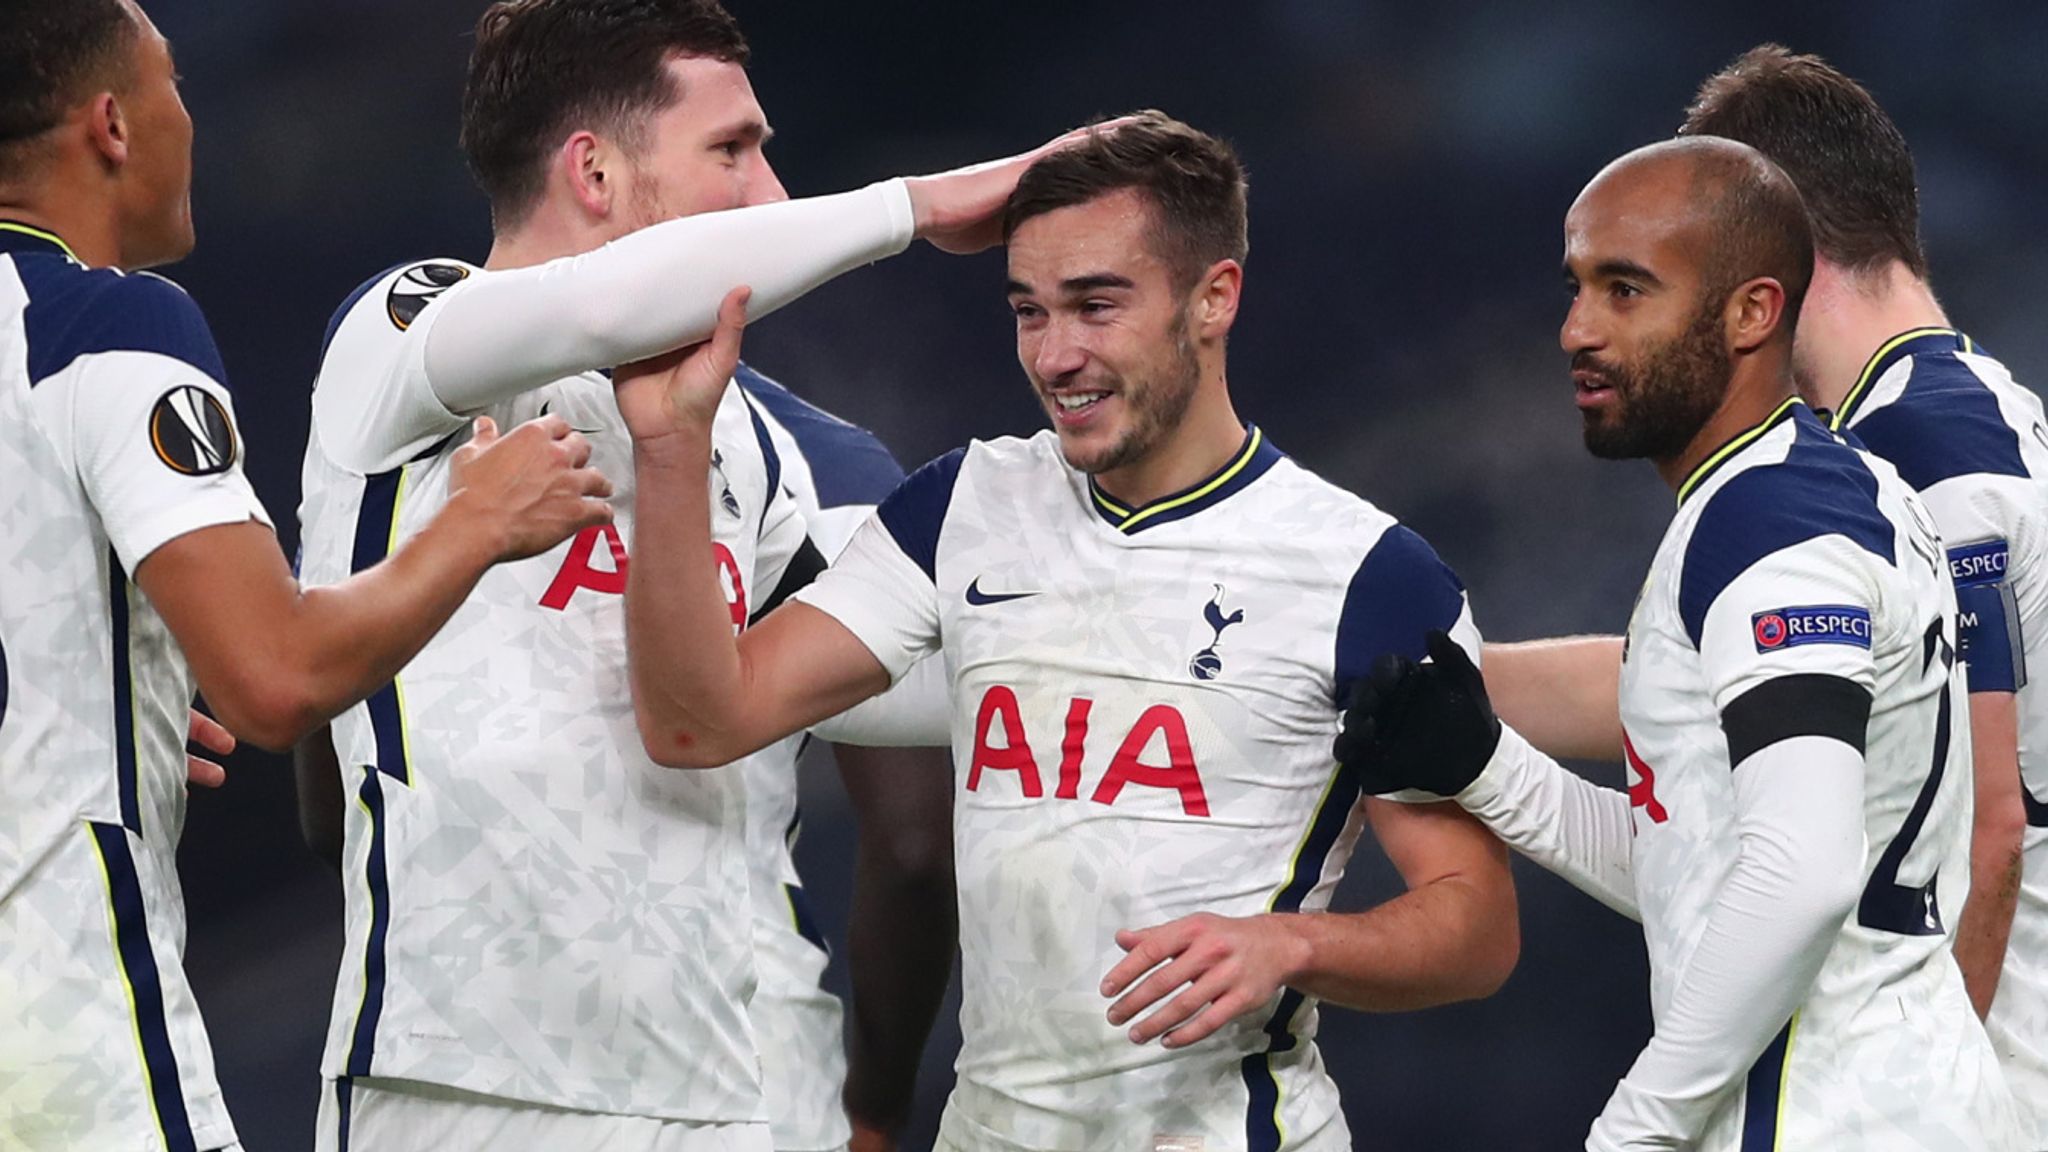 Report: Tottenham prepared to spend big in an attempt to land